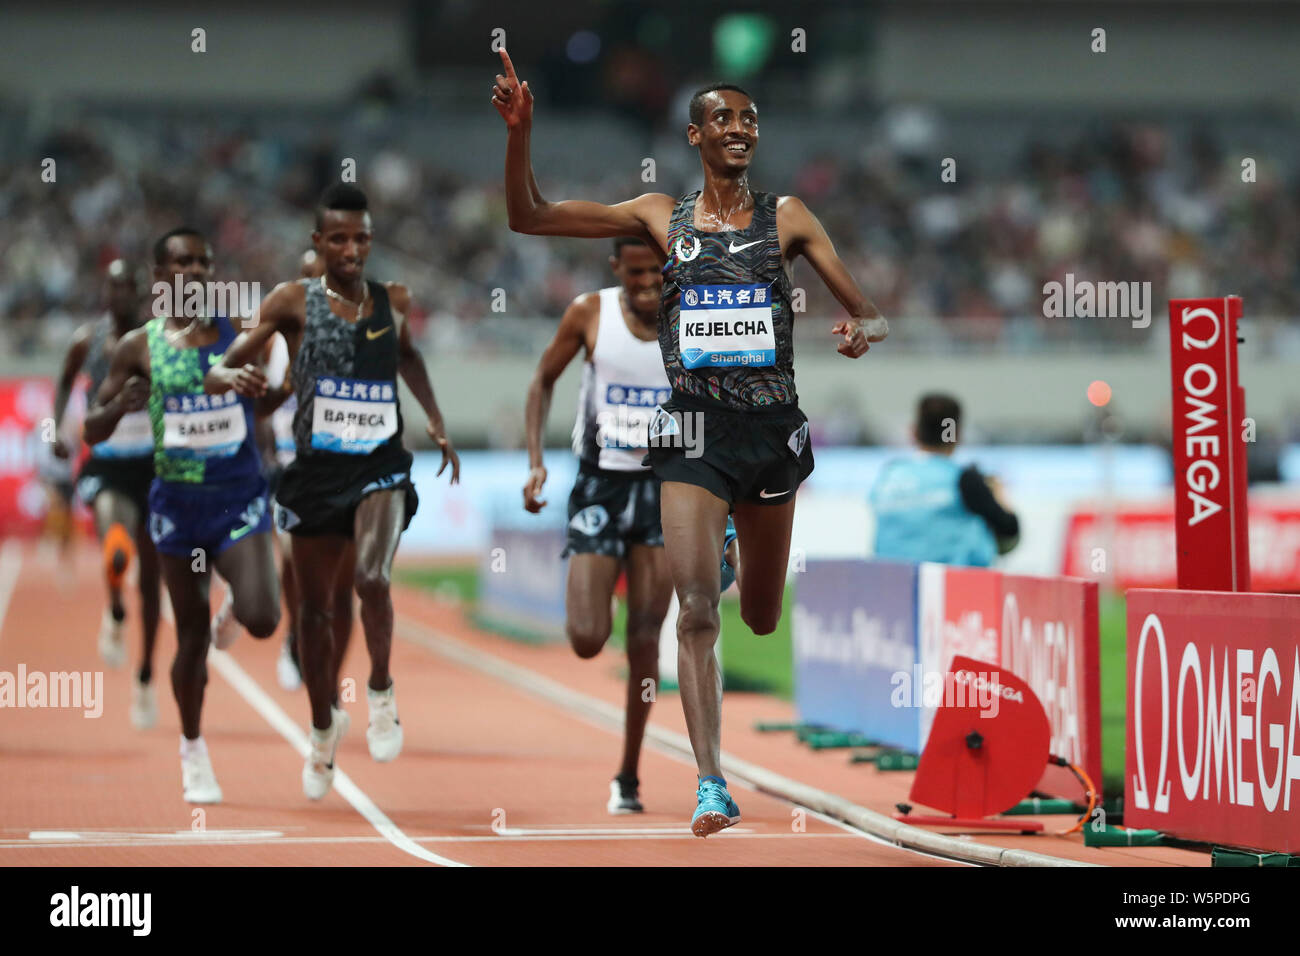 Ethiopian Distance Runner Yomif Kejelcha Competes In The 5000m Men